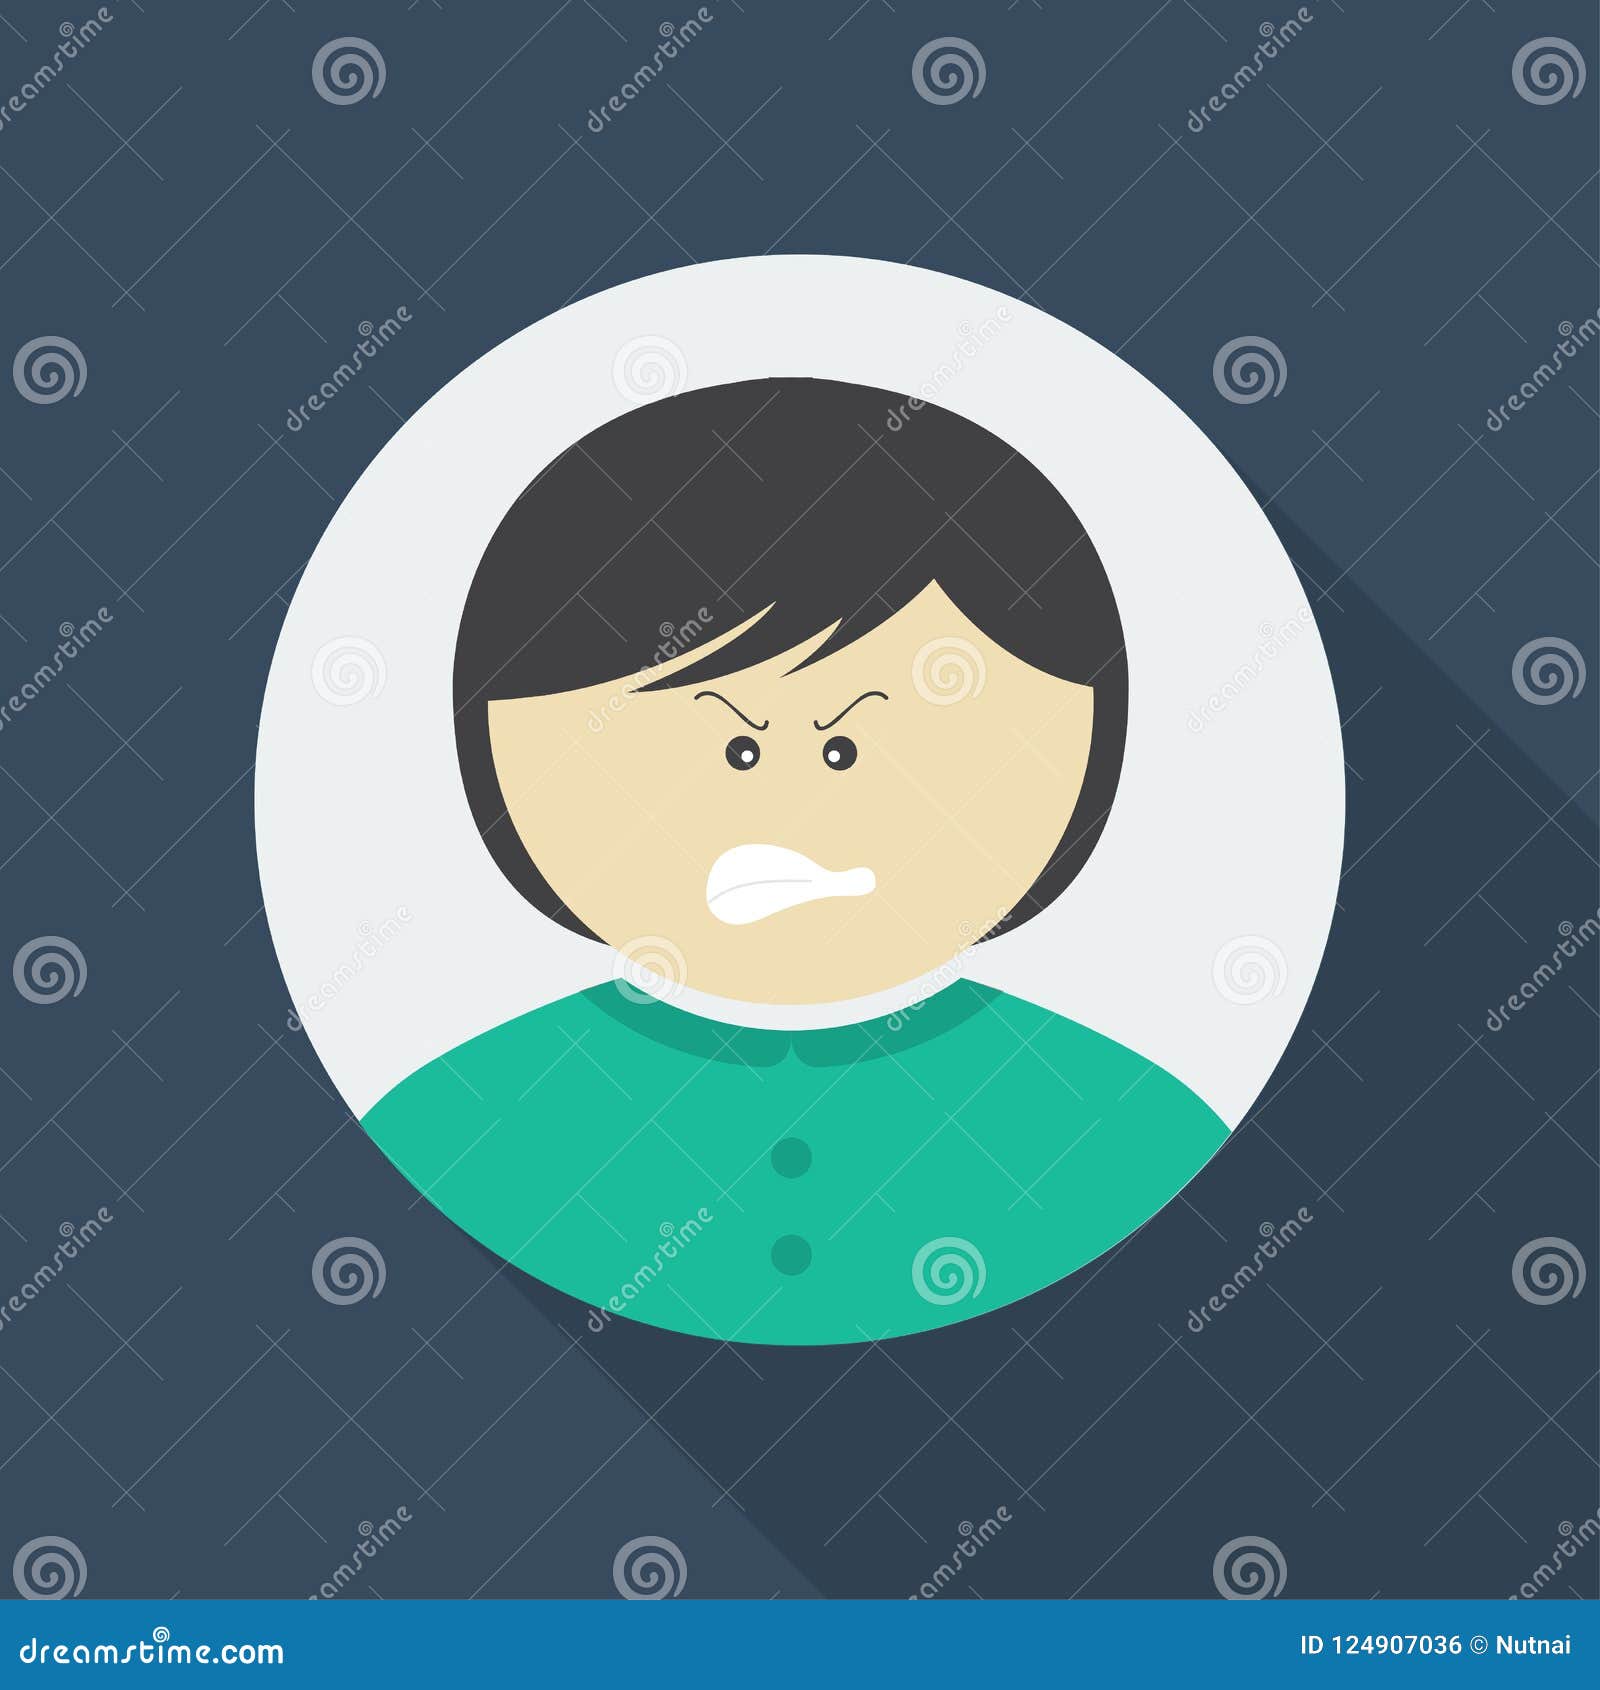 Download Angry Woman Cartoon Character - Vector Stock Vector - Illustration of flat, young: 124907036